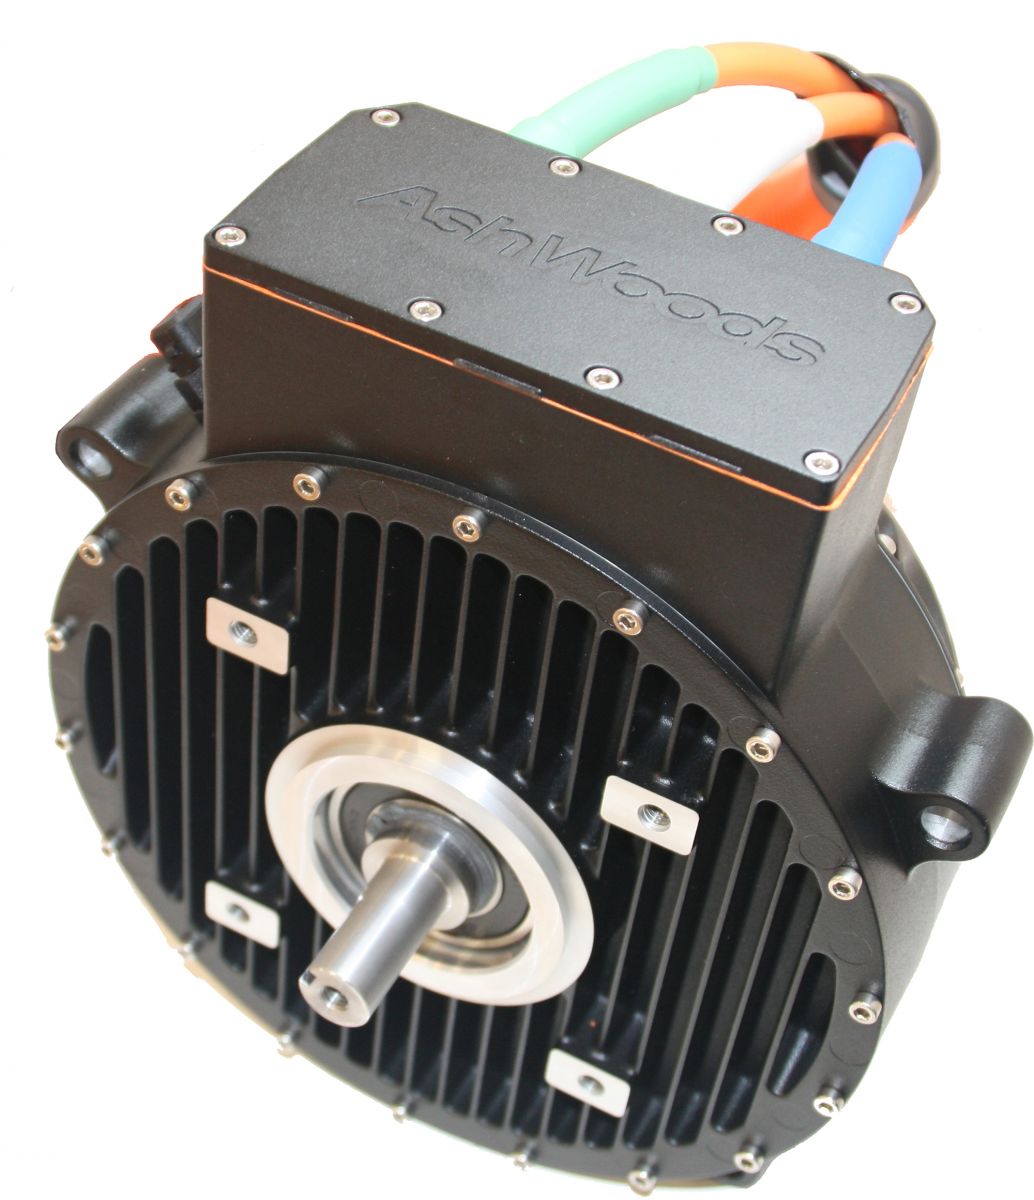 Axial Flux Permanent Magnet Synchronous Motor